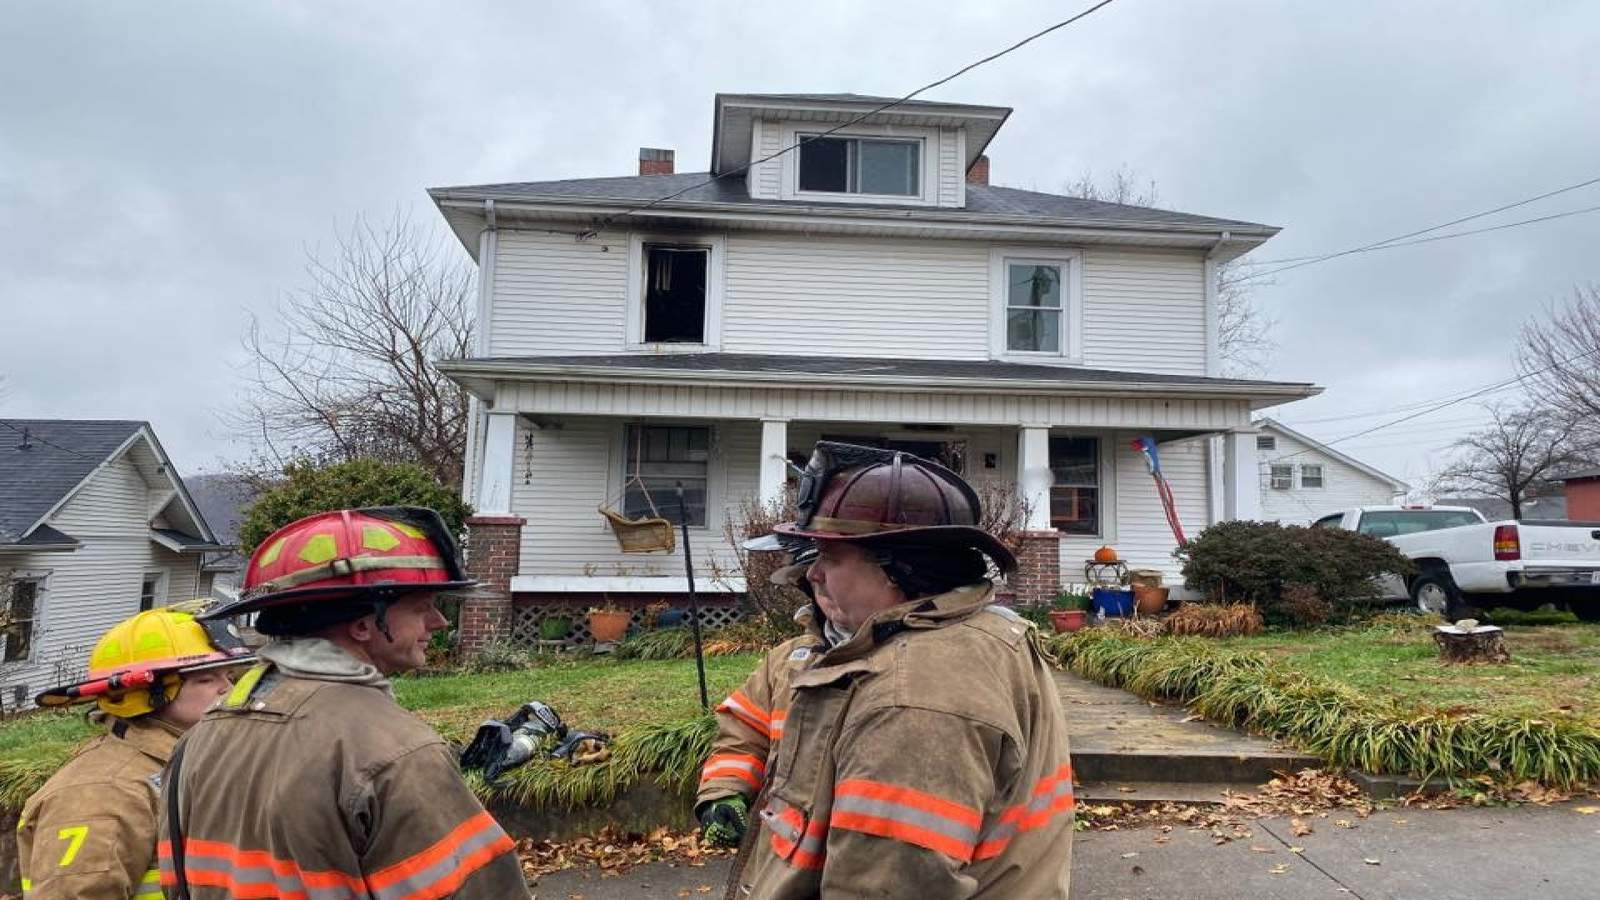 Seven people displaced after Saturday morning house fire in Roanoke